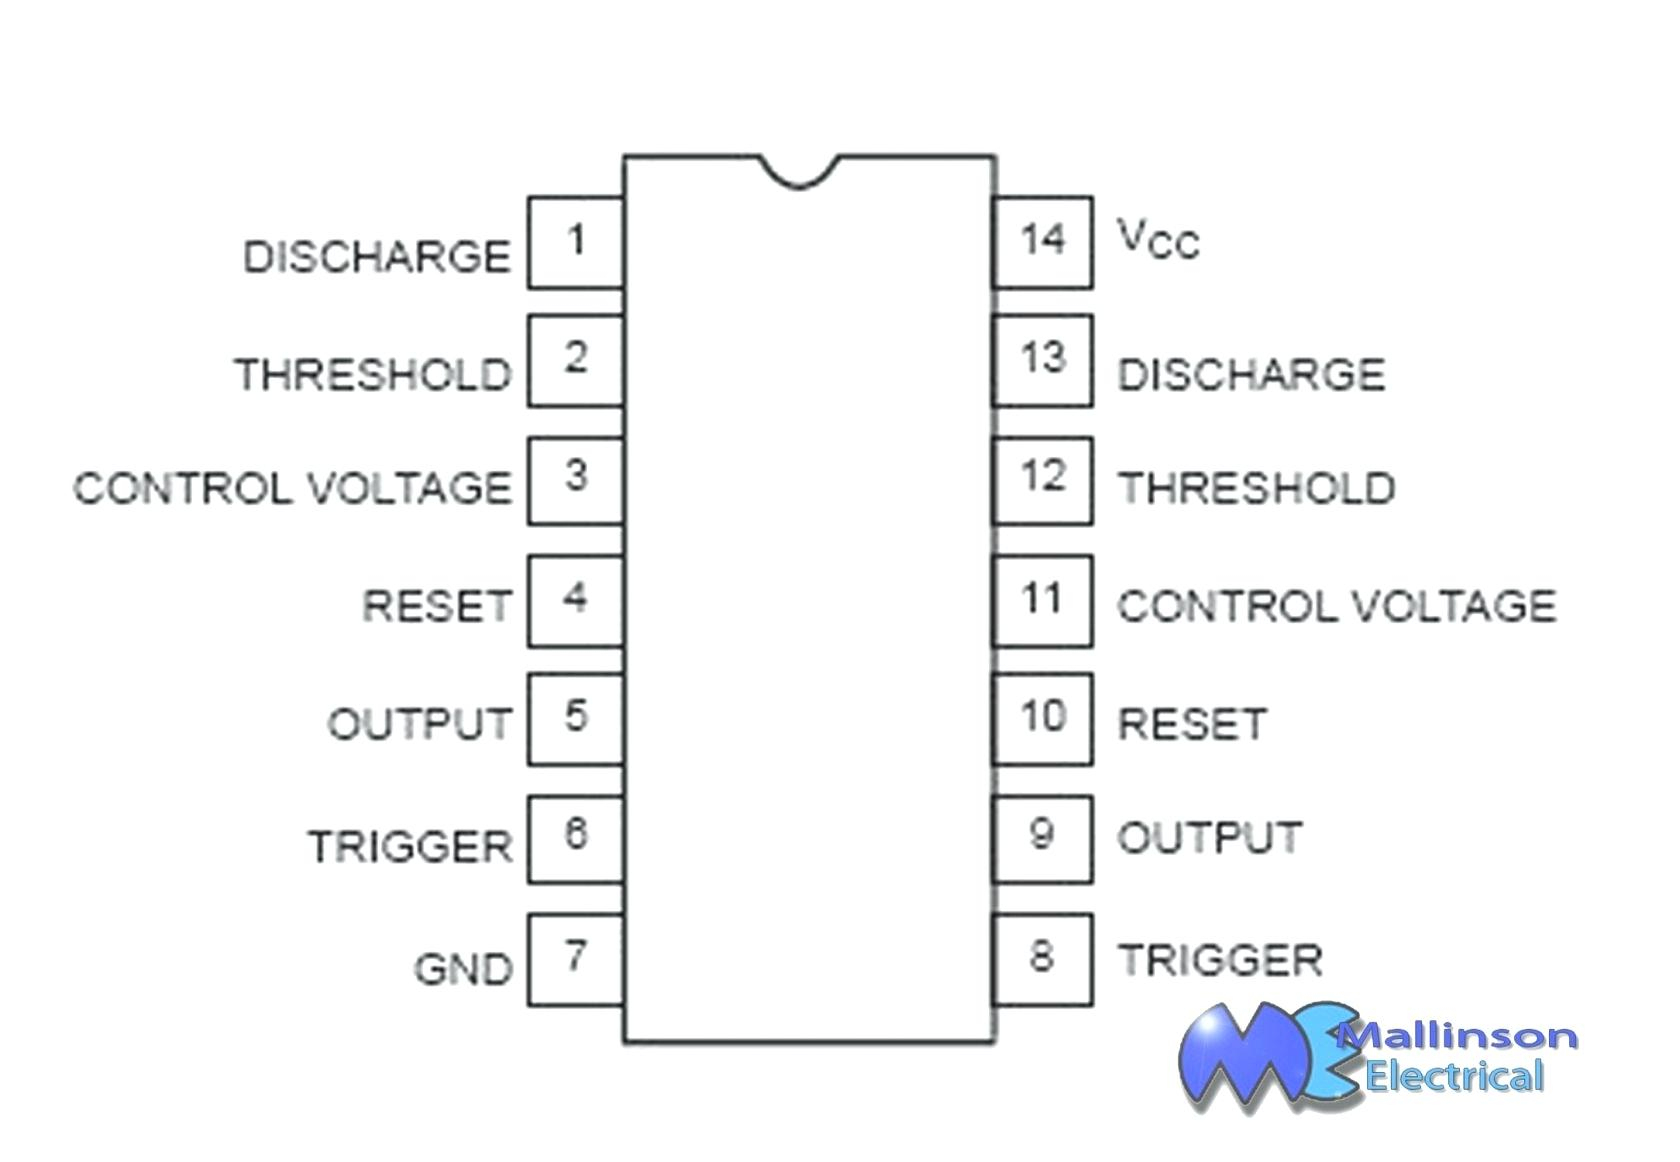 The12Volt Com Wiring Diagram | Wiring Diagram - The12Volt.com Wiring Diagram